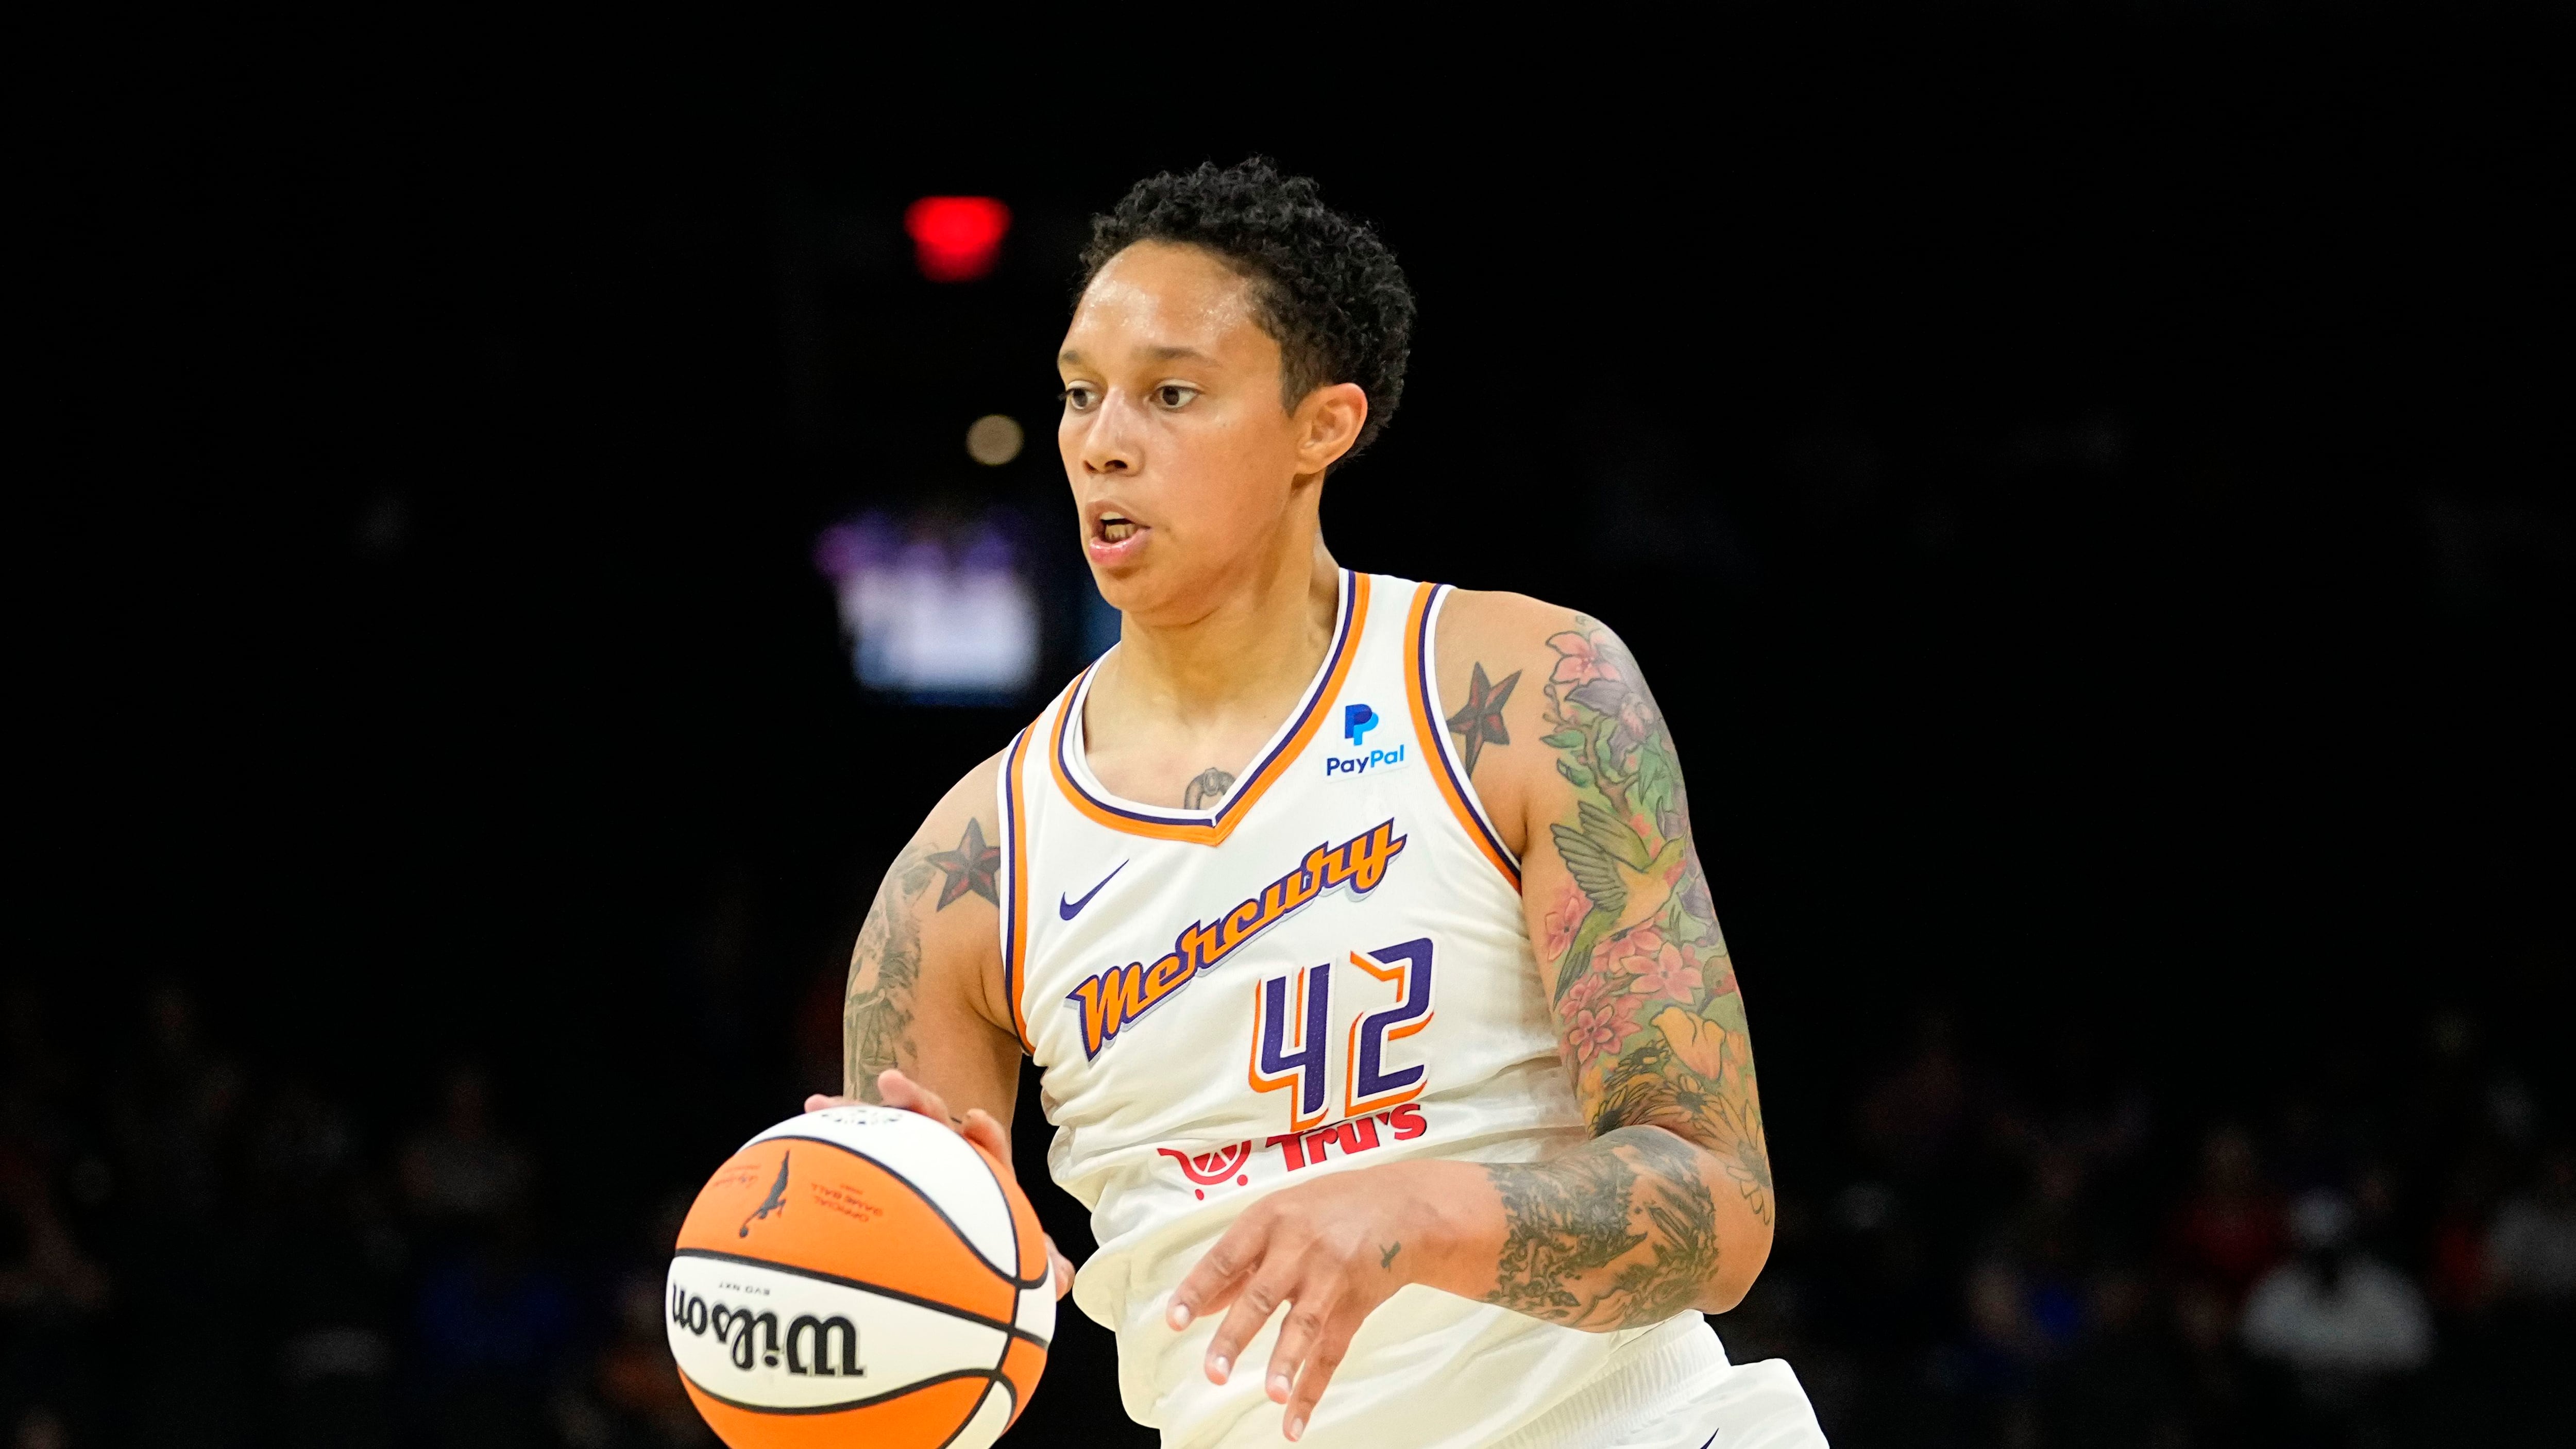 Saturday May 18 and Sunday May 19 have their own WNBA best bets, odds, and predictions - Weekend Recap and Standings